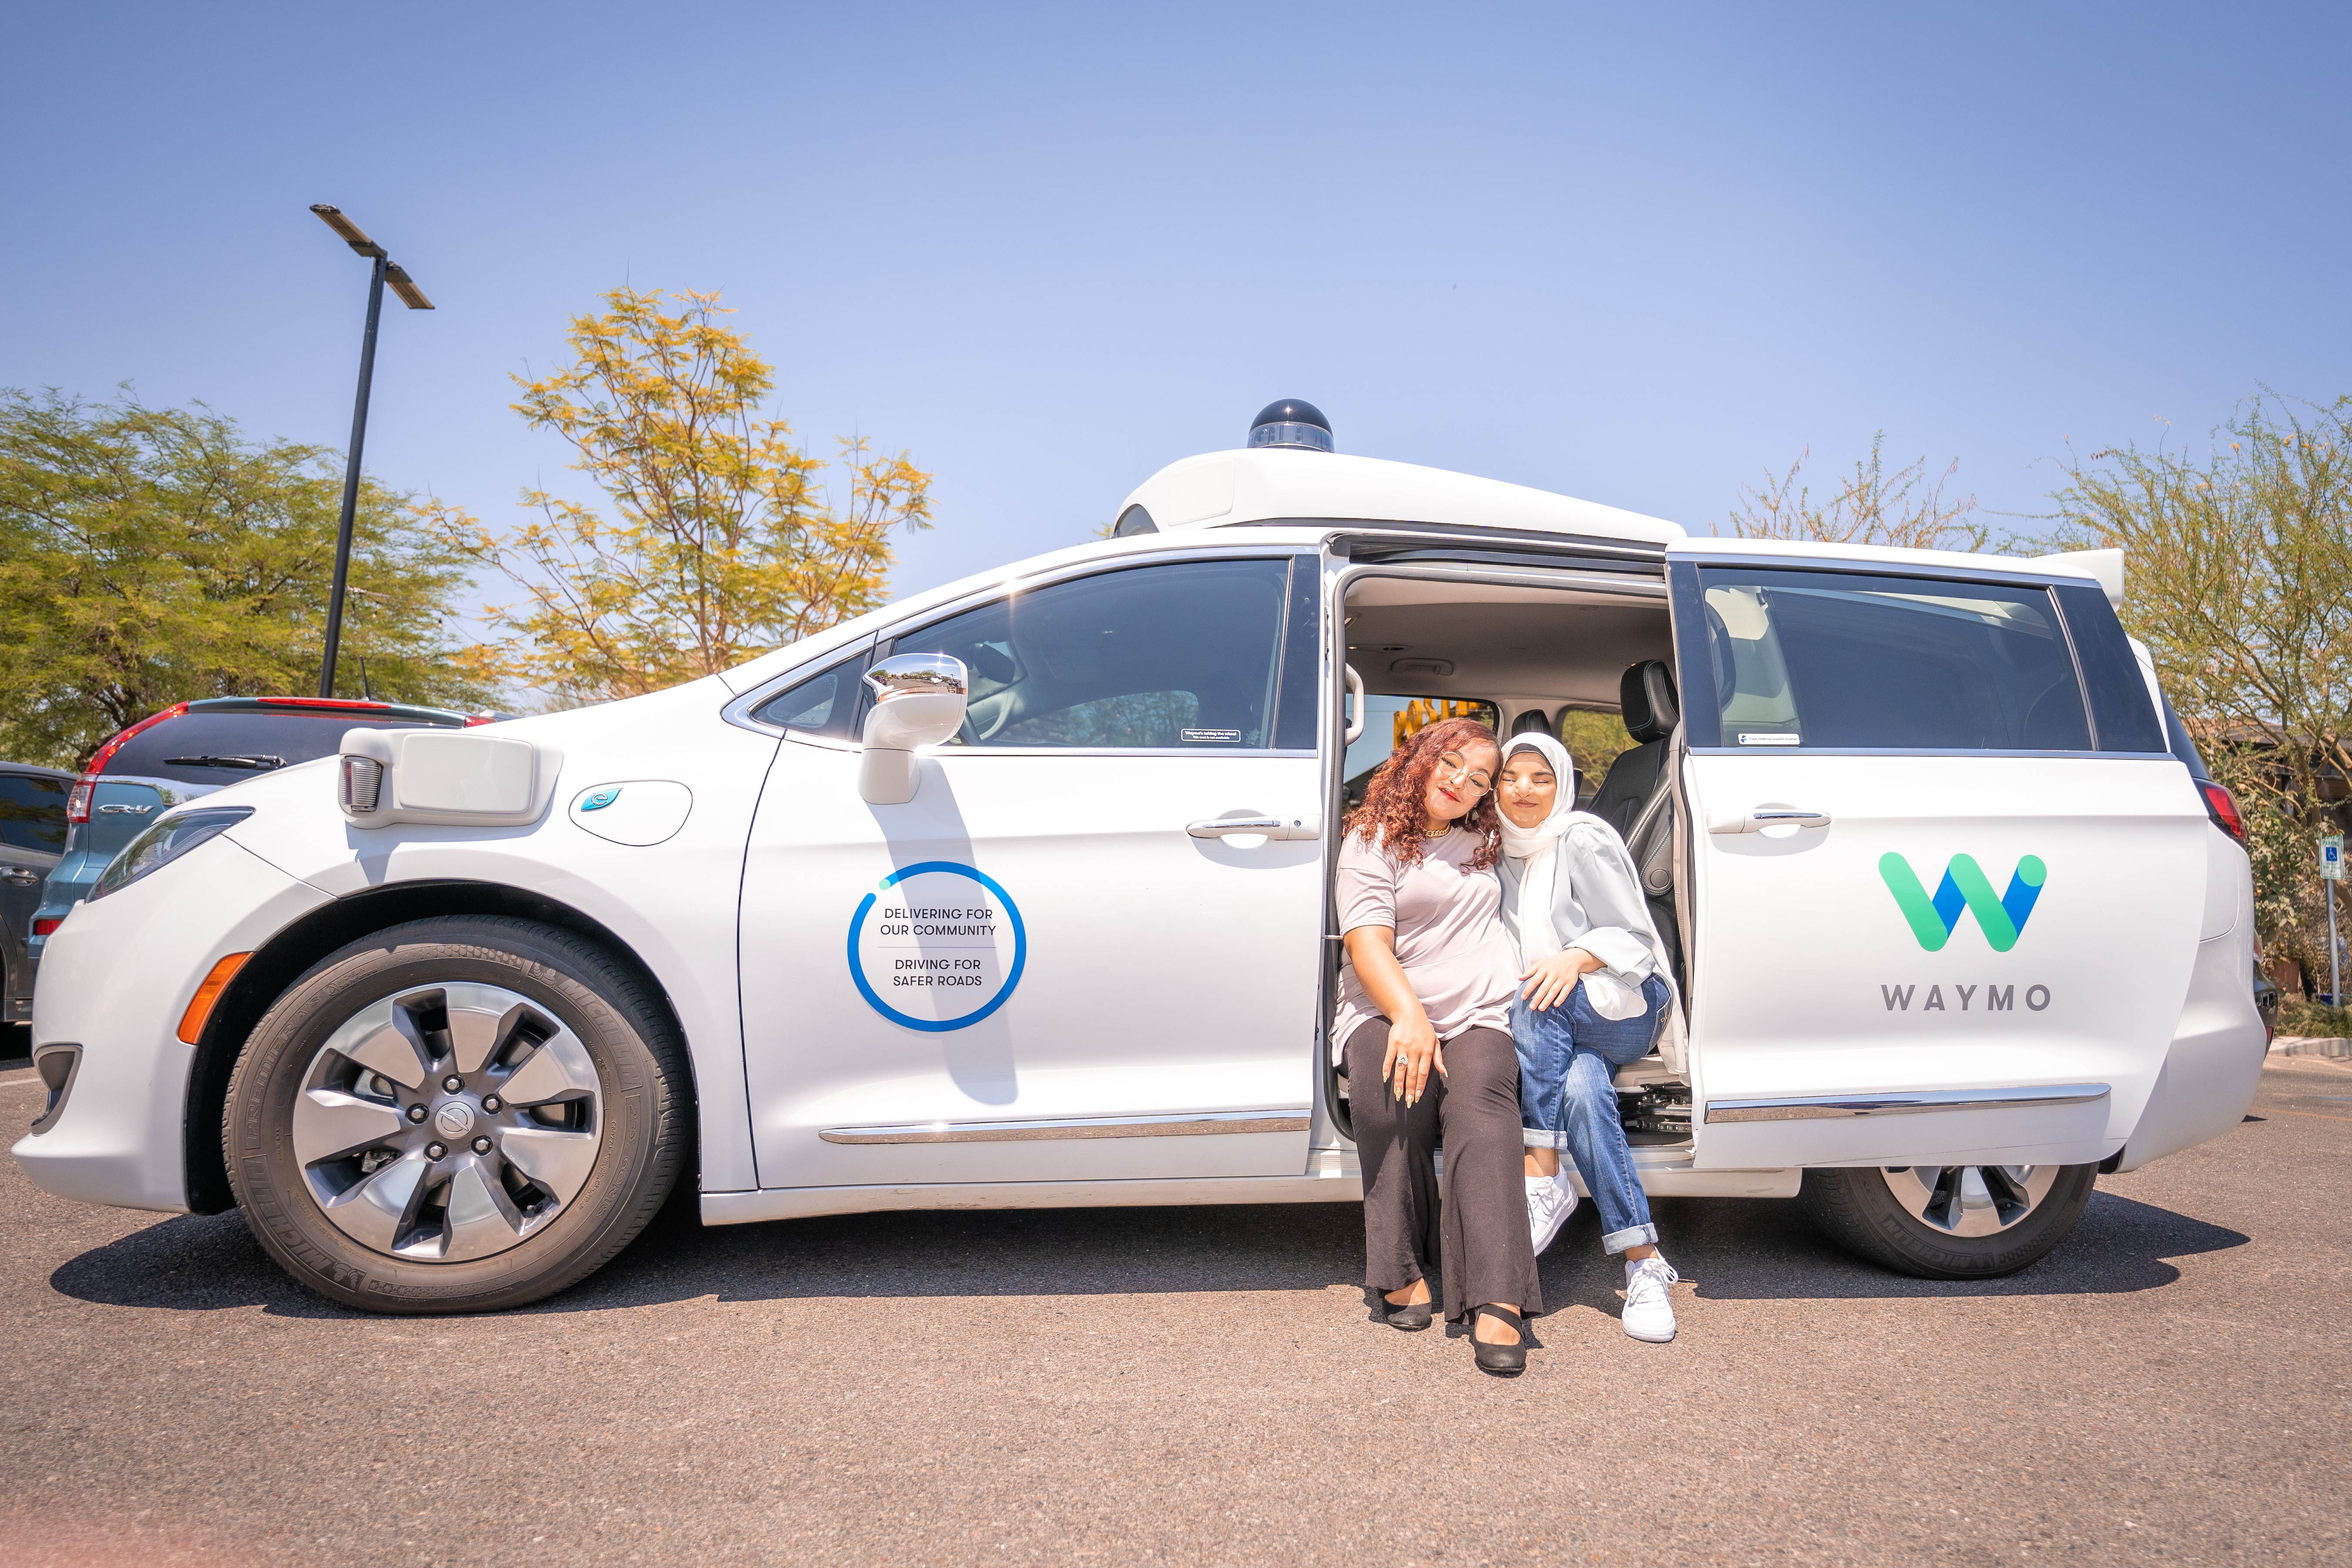 Two people sitting in the doorway of a Waymo autonomous vehicle